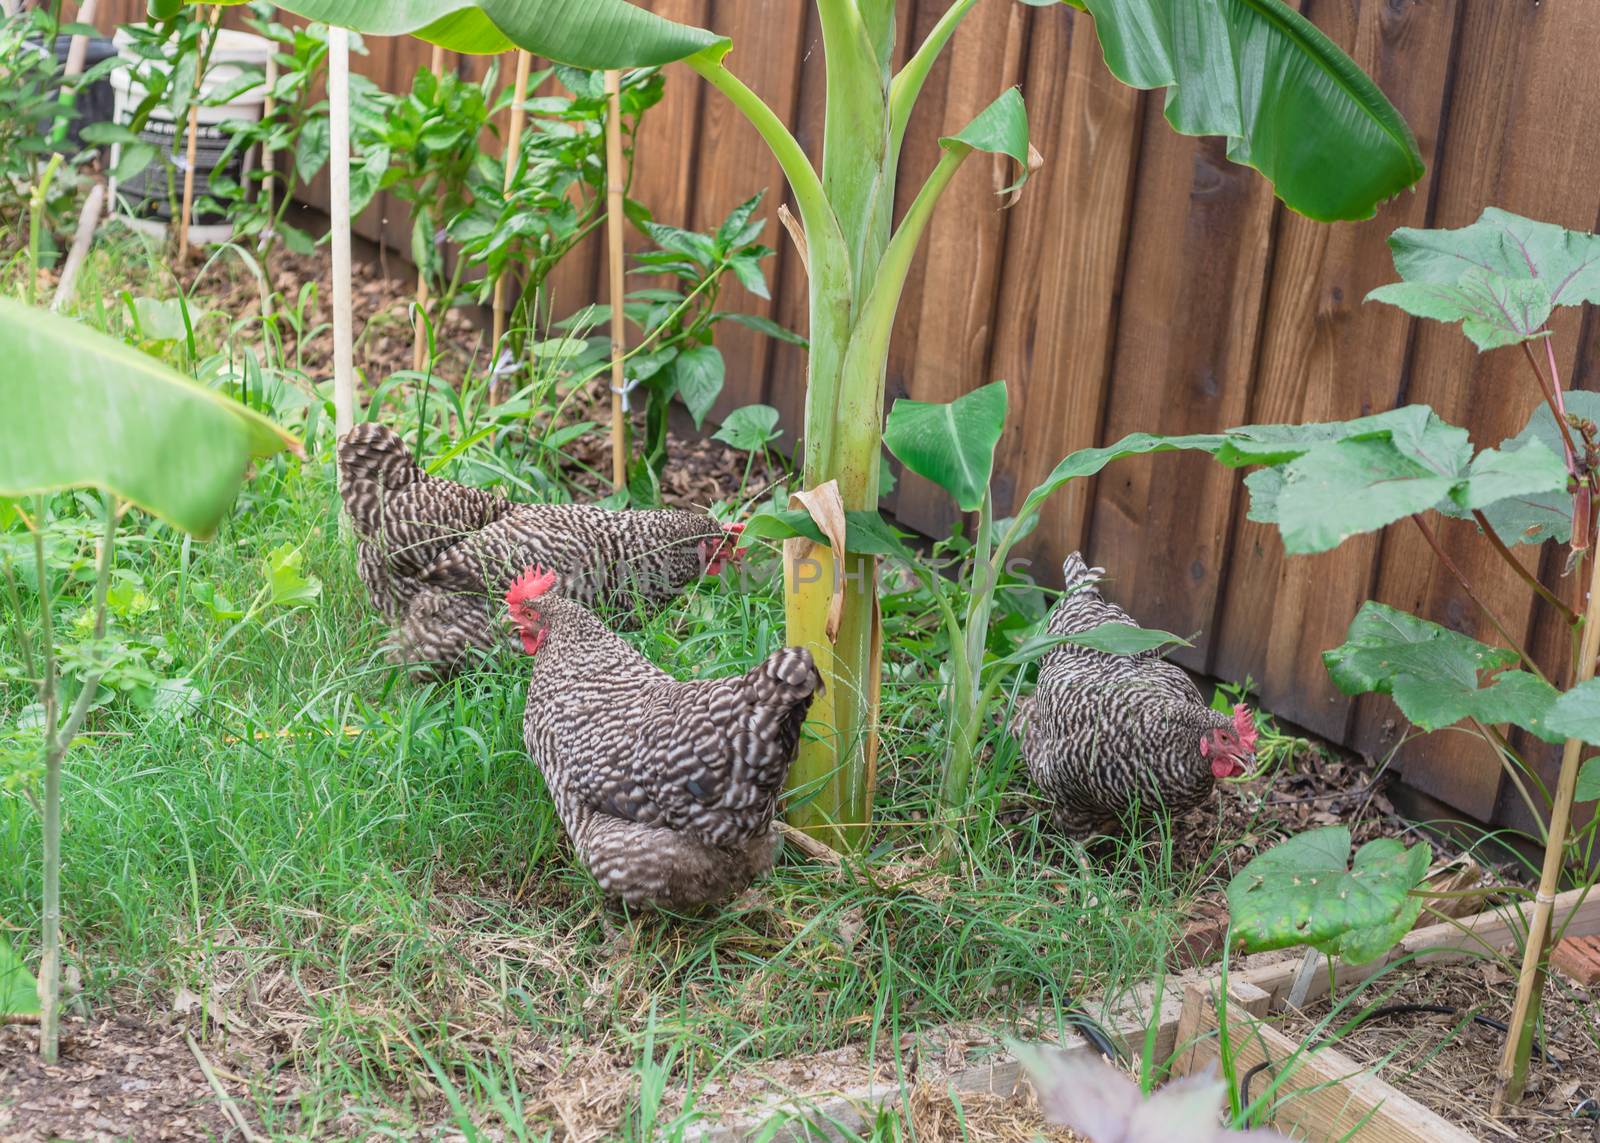 Three free range chickens at backyard garden near Dallas, Texas, America. Marans breed barred feathering laying hen chick pecking in natural settings at vegetable allotment